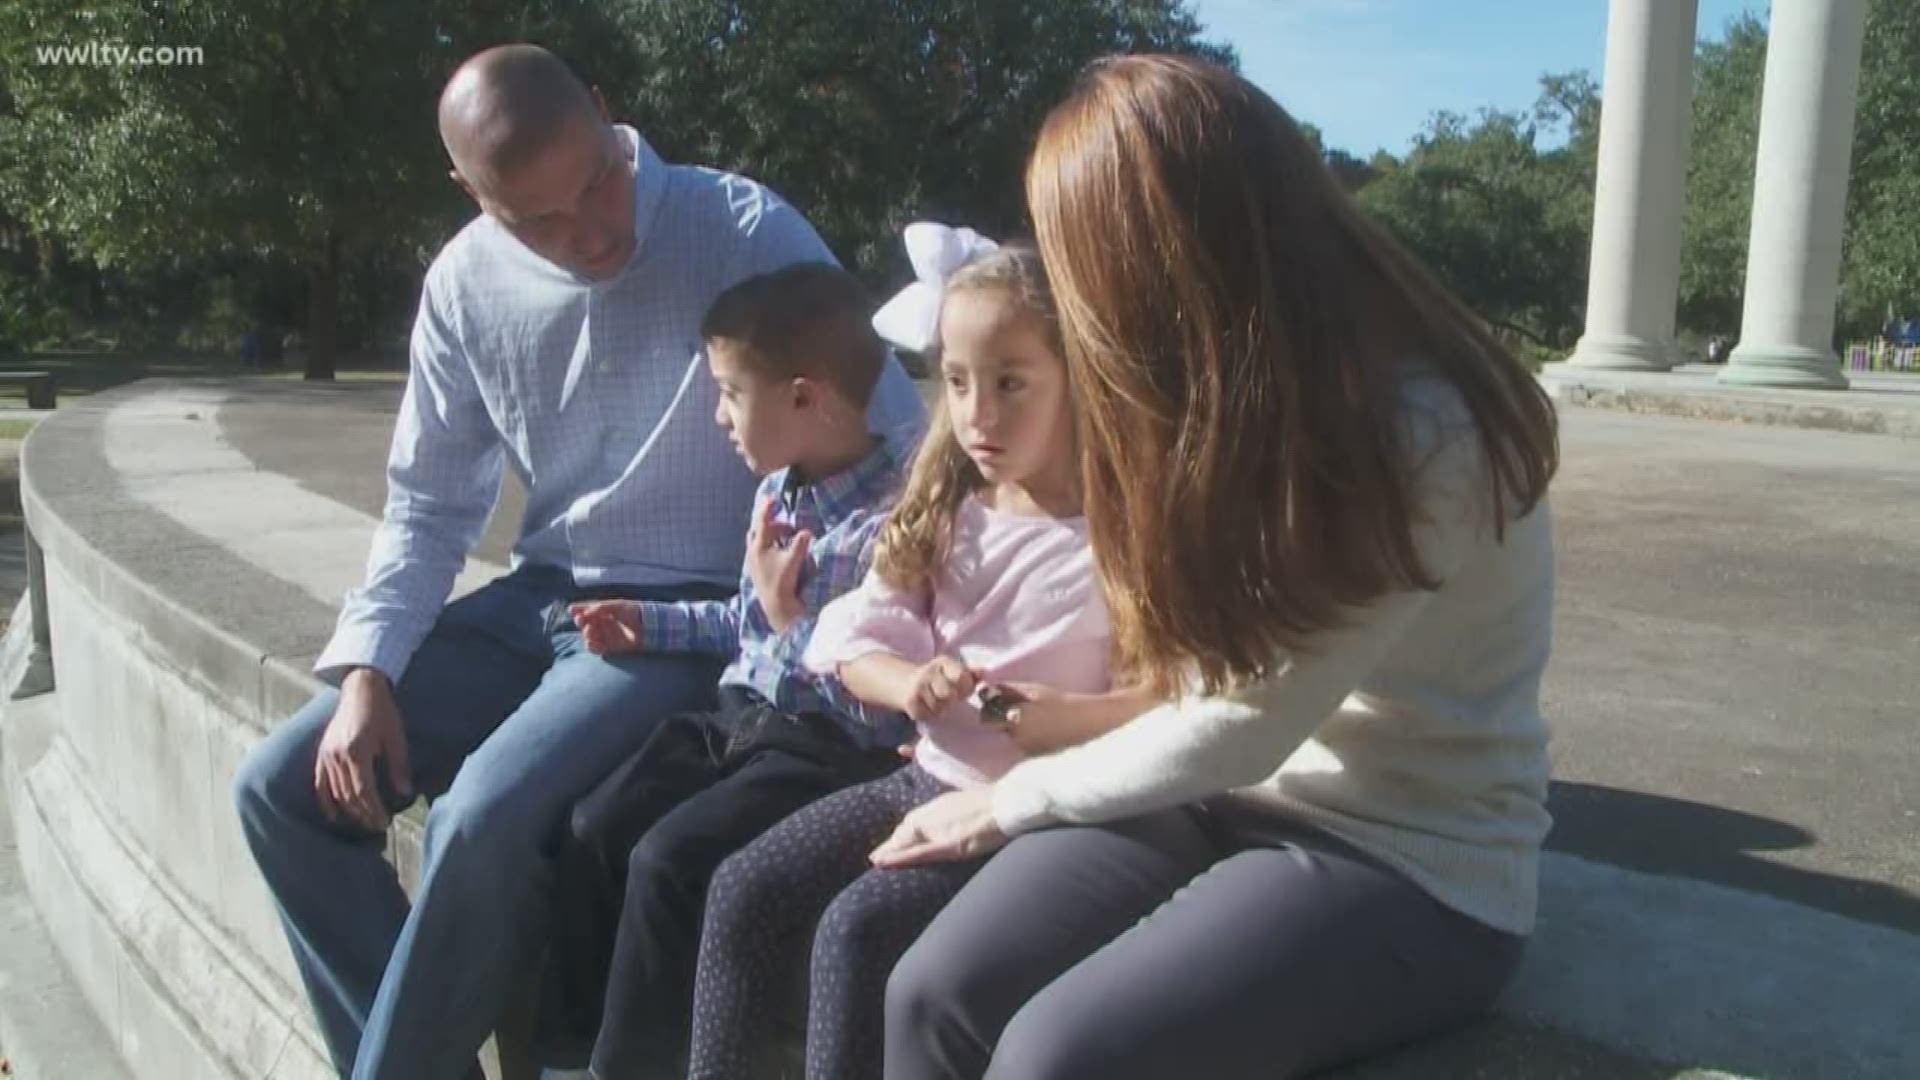 They weighed as much as a baseball when they were born, just more than a single pound each.
 Now a Metairie family has a hopeful story for couples who have preemies.